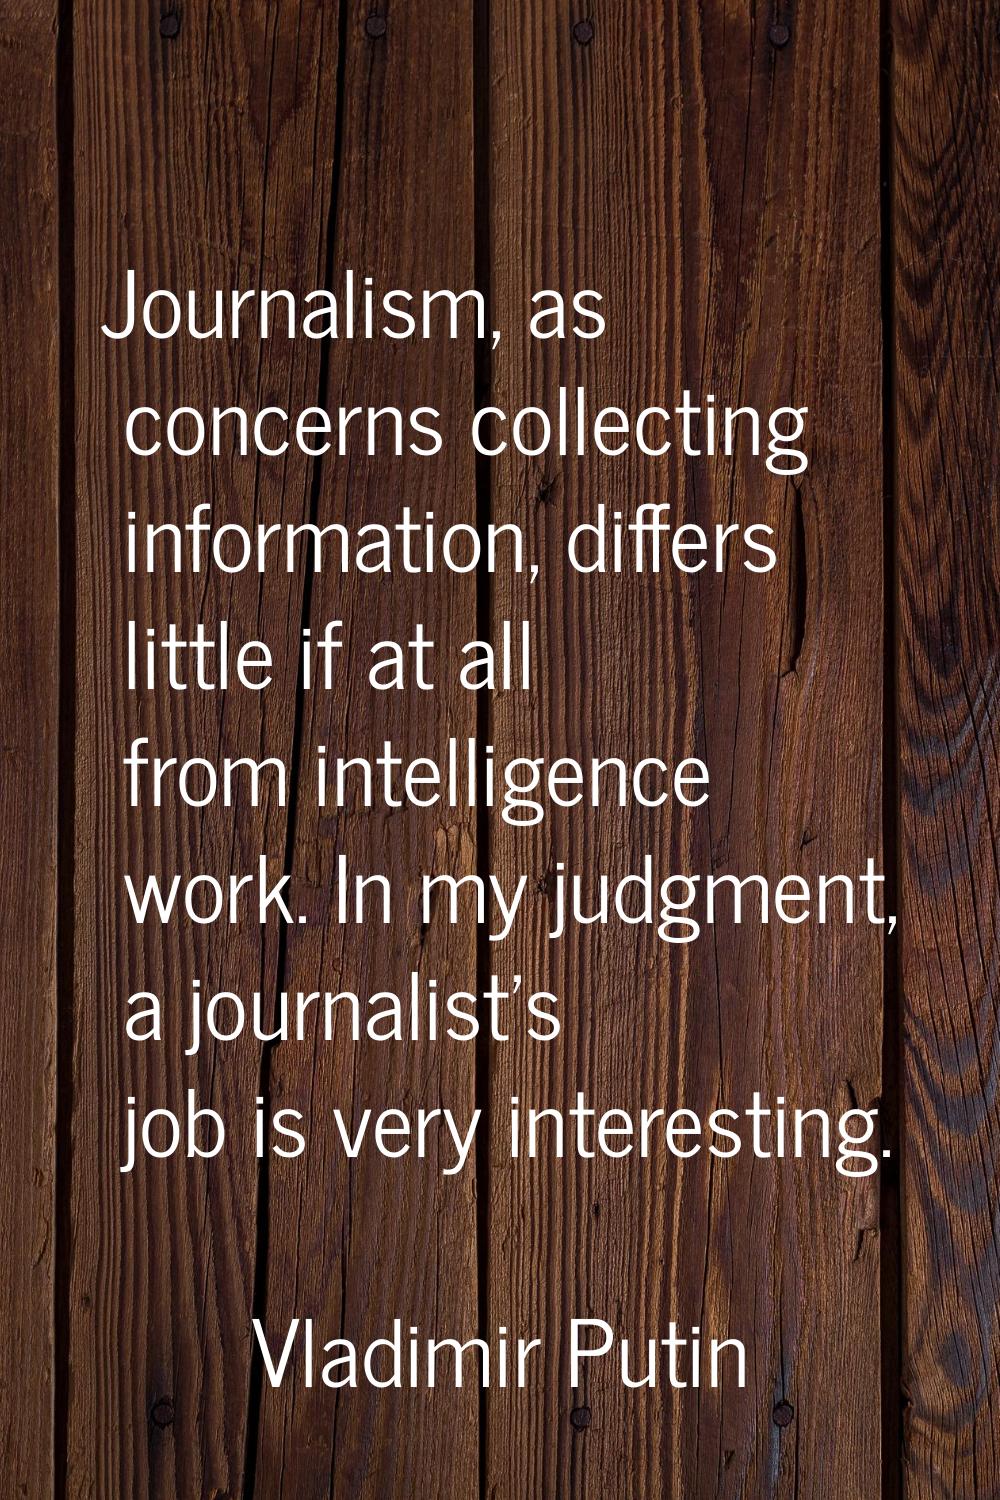 Journalism, as concerns collecting information, differs little if at all from intelligence work. In